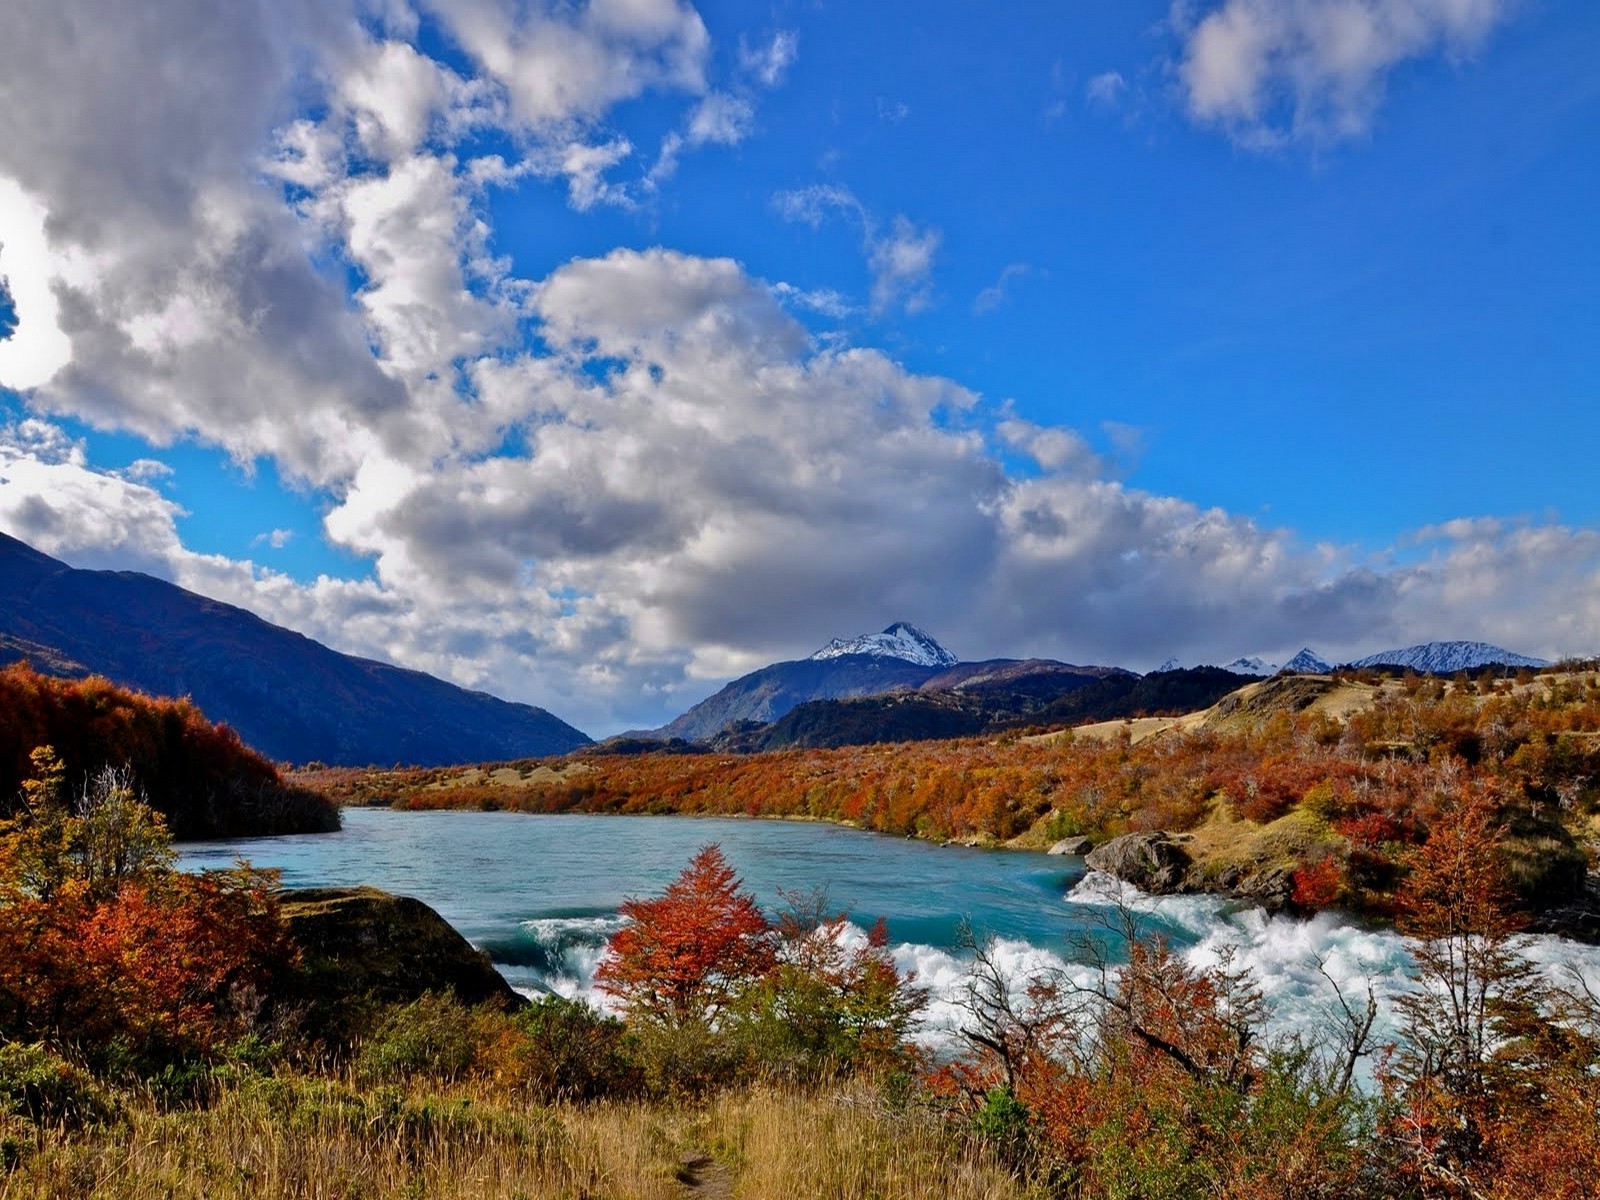 landscape, Nature, River, Trees, Rapids, Dry Grass, Shrubs, Mountain, Chile, Snowy Peak, Clouds, Fall, Morning Wallpaper